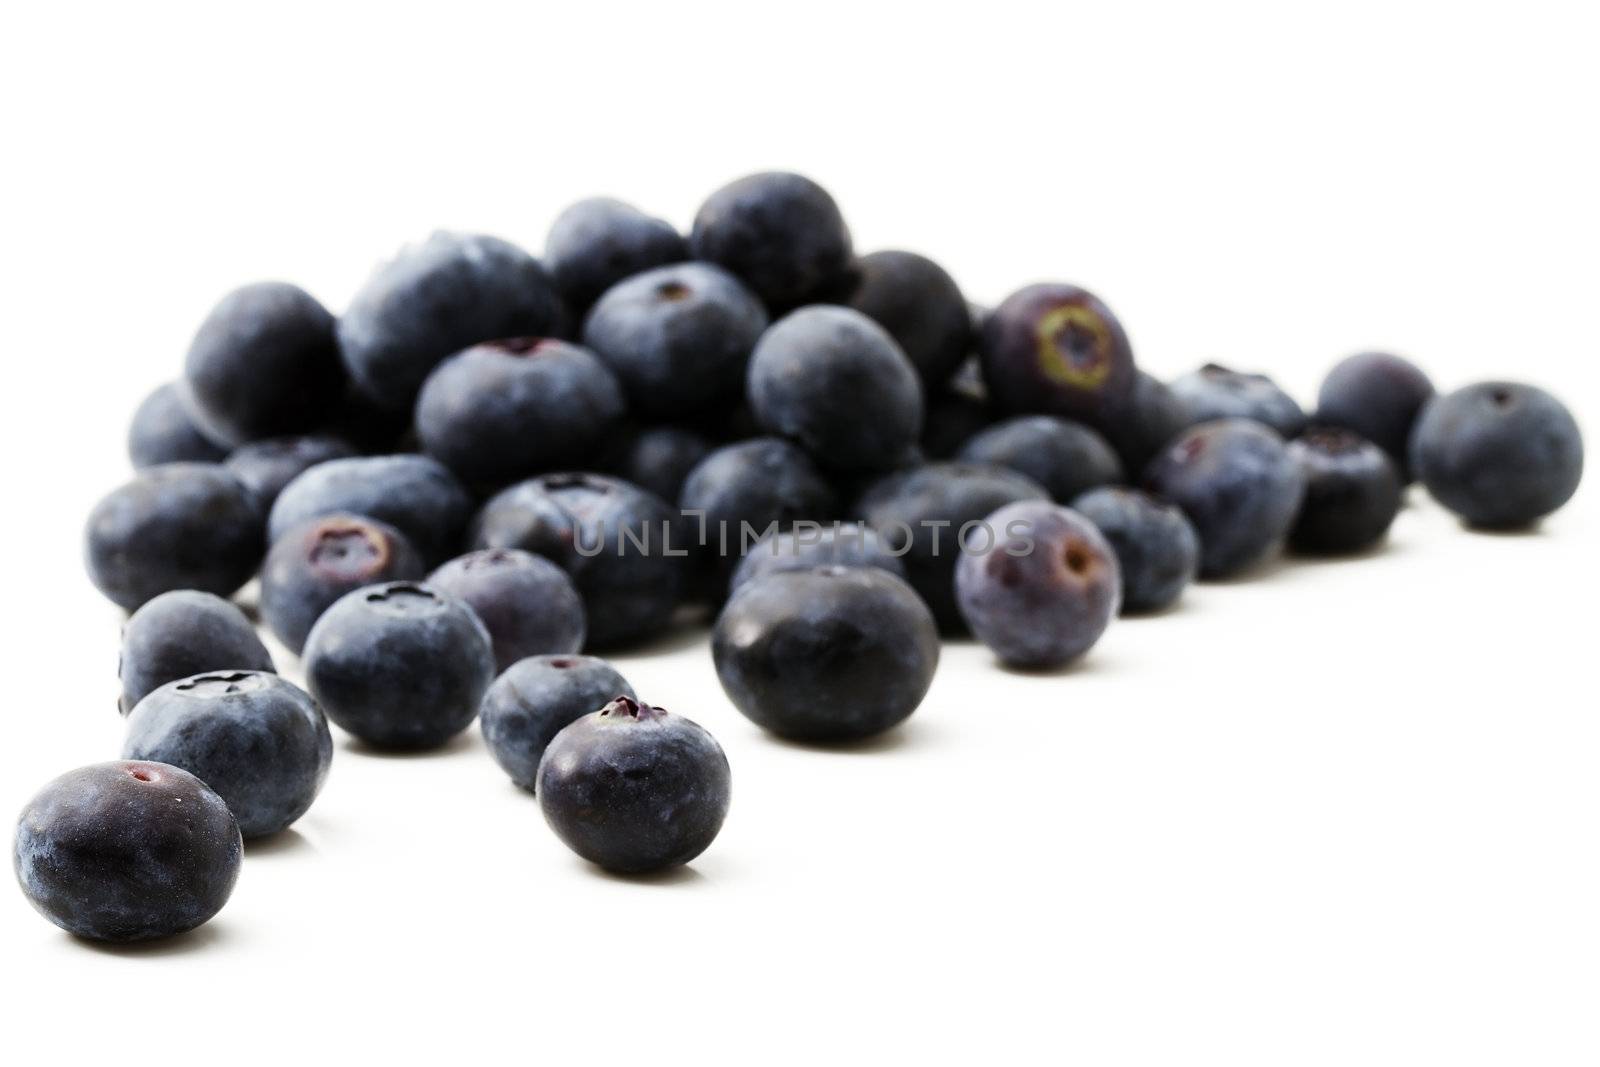 some blueberries by RobStark